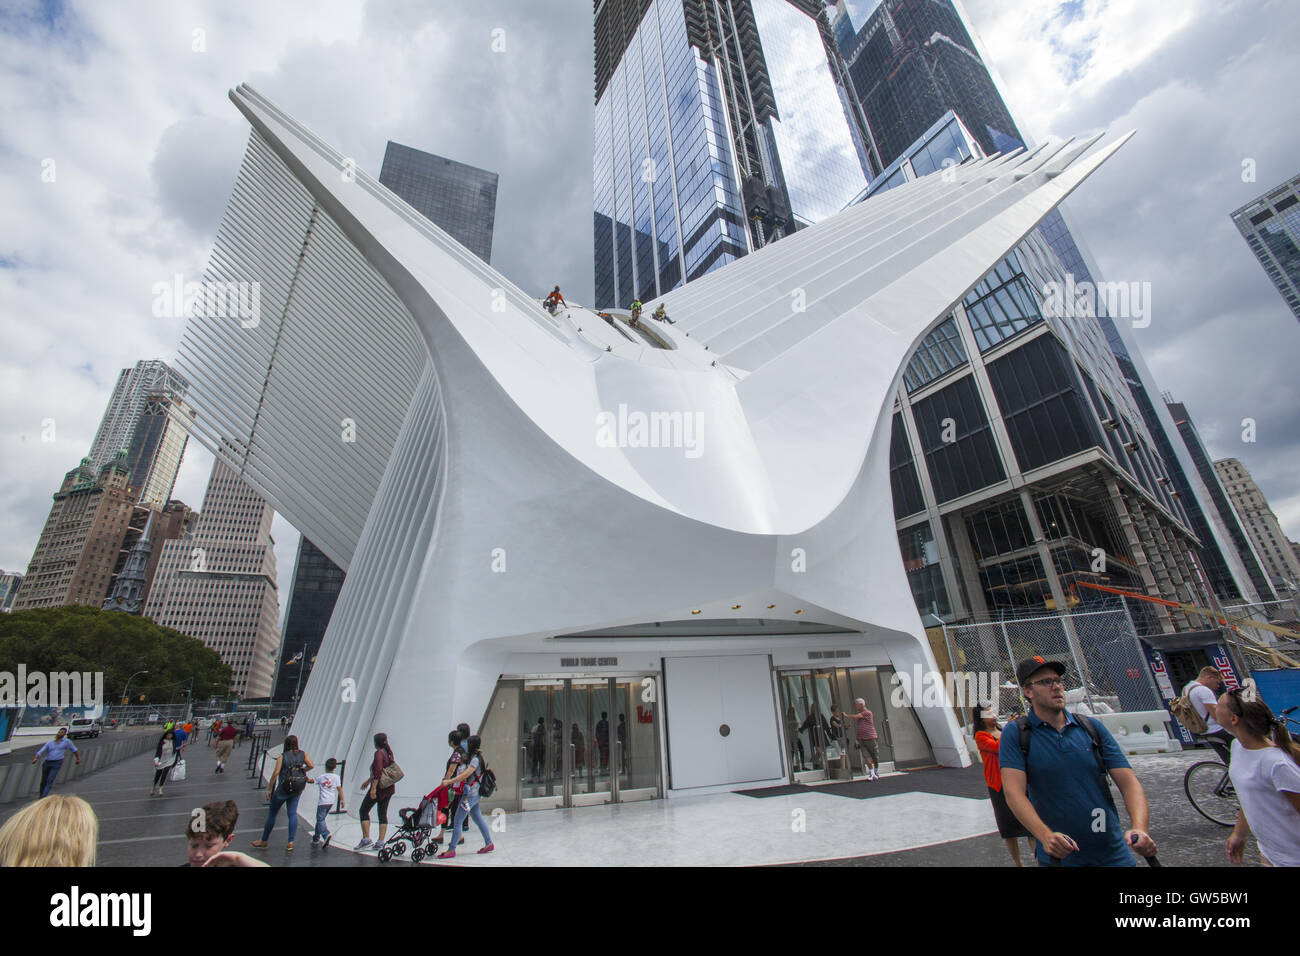 Oculus World Trade Center Mall built on the site of "Ground Zero" next to  the 9/11 Memorial Stock Photo - Alamy